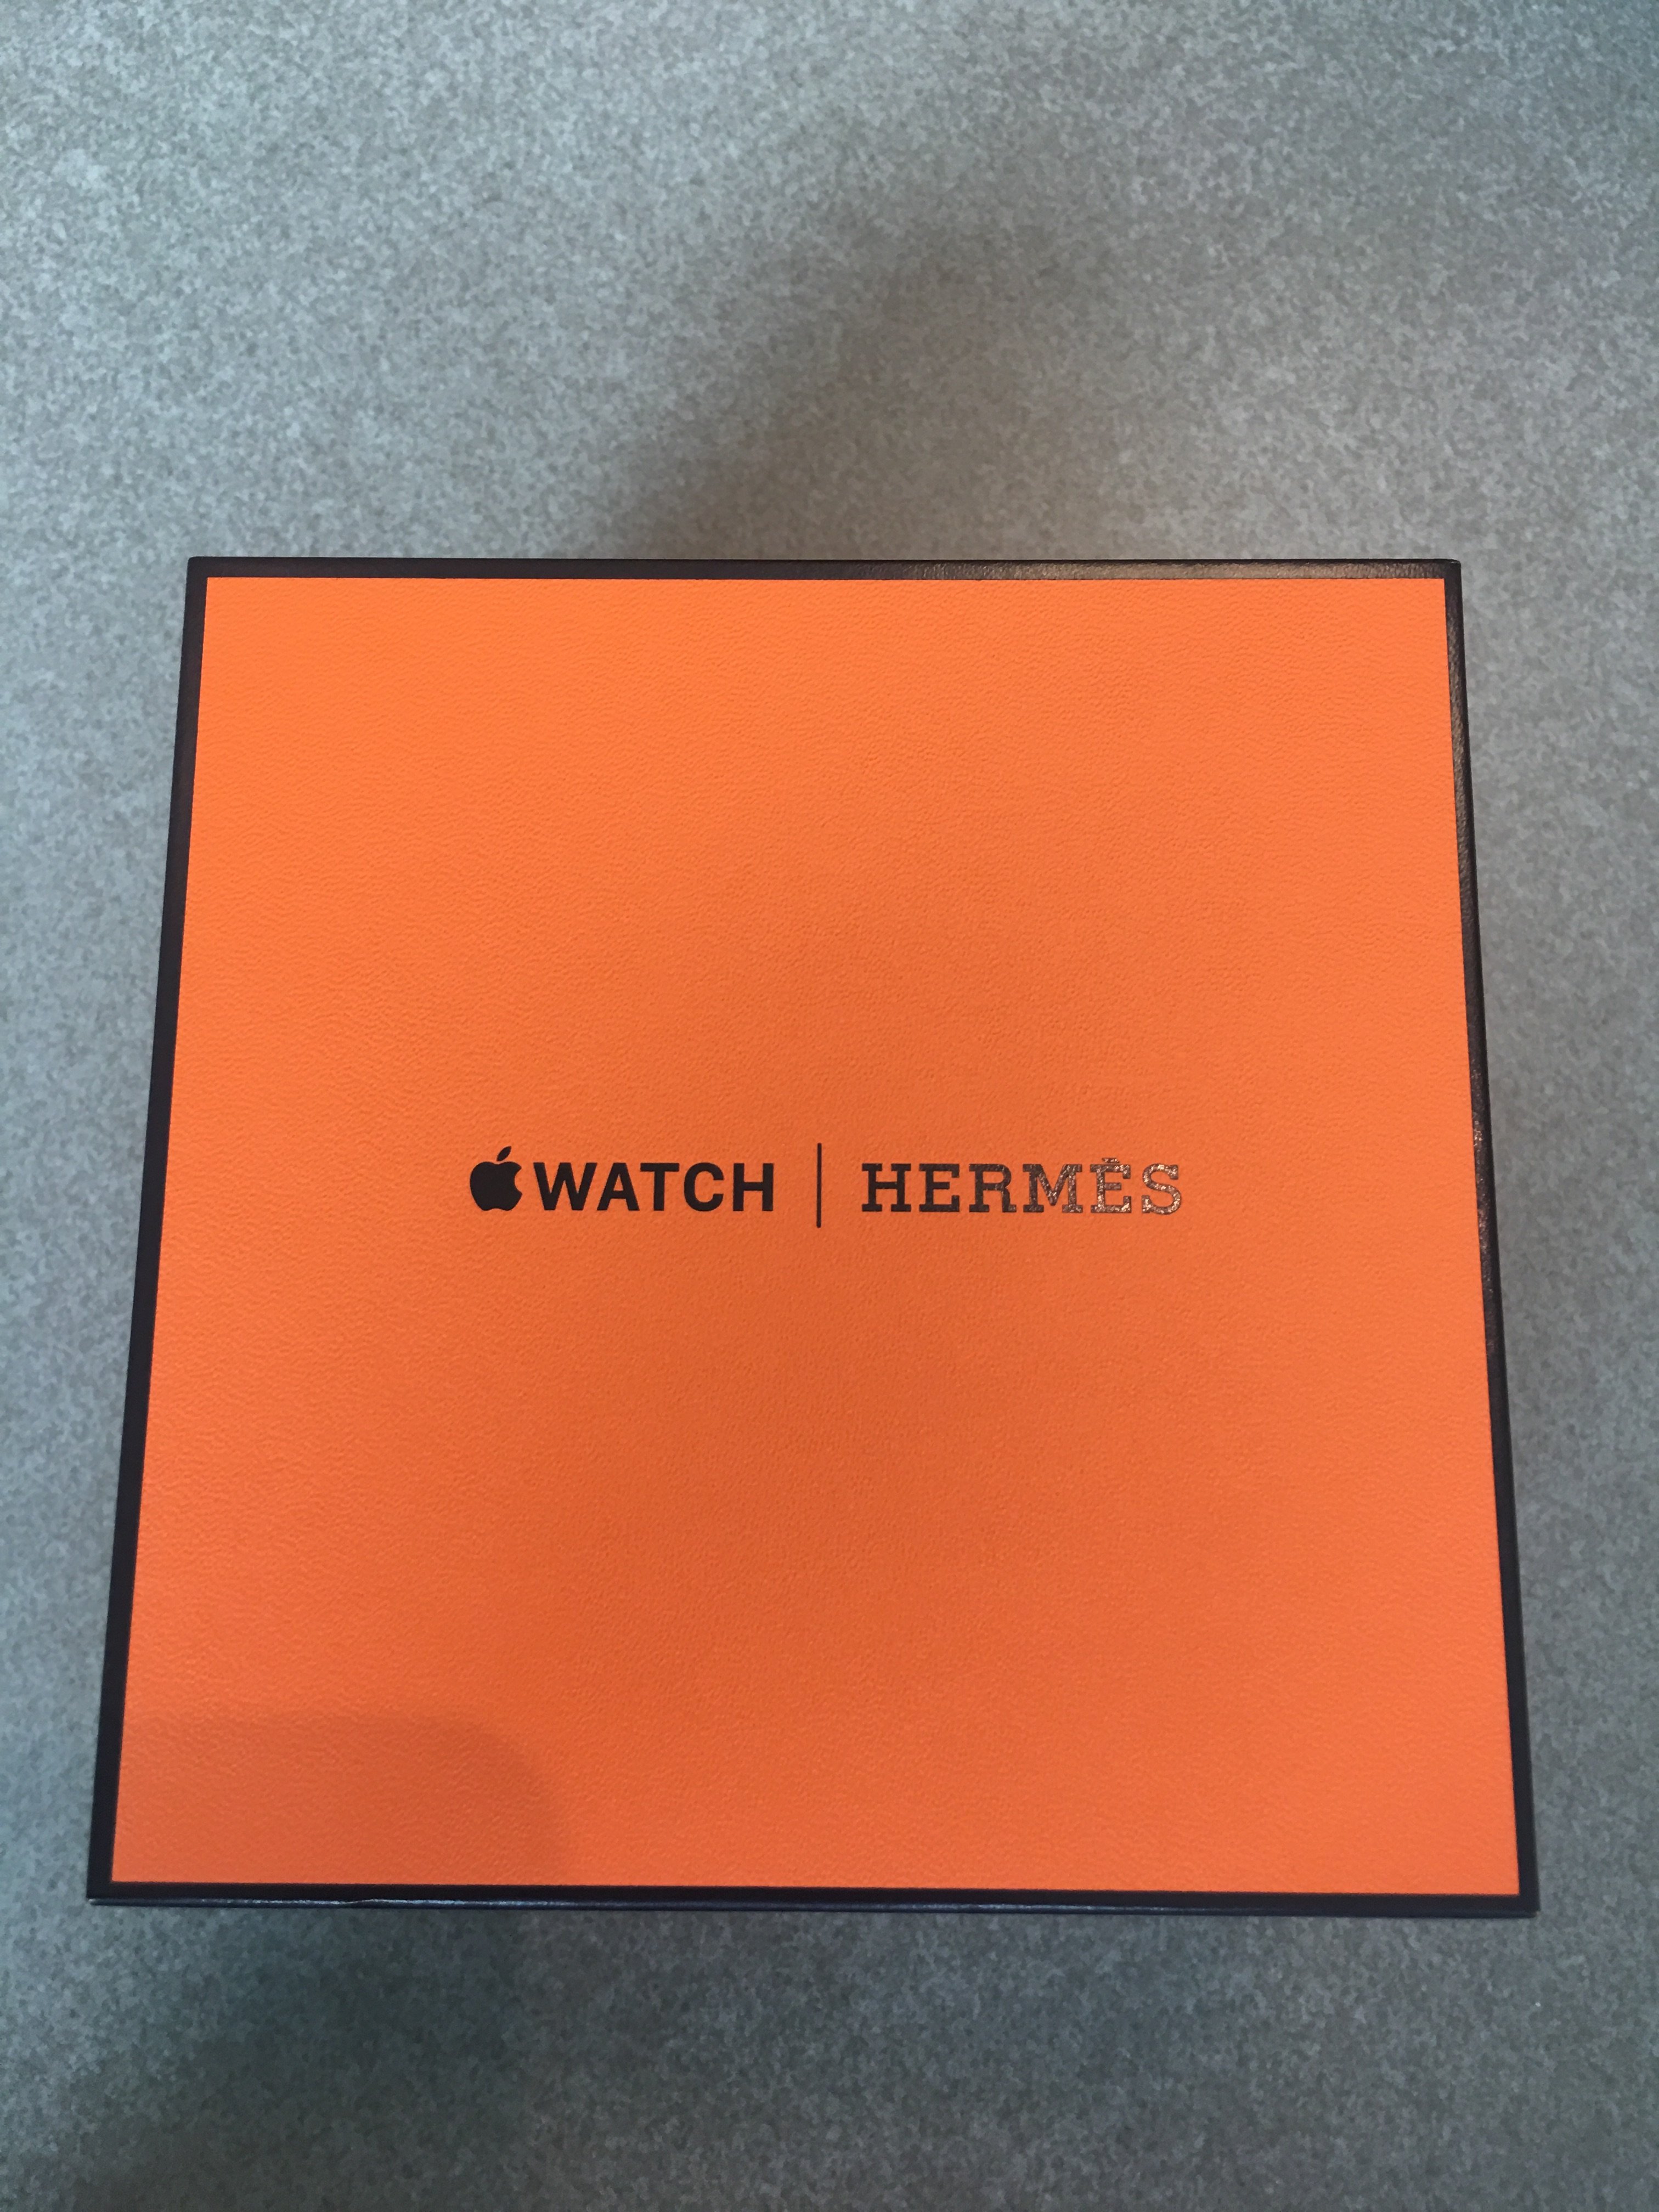 As if Hermès wasn't coveted enough…